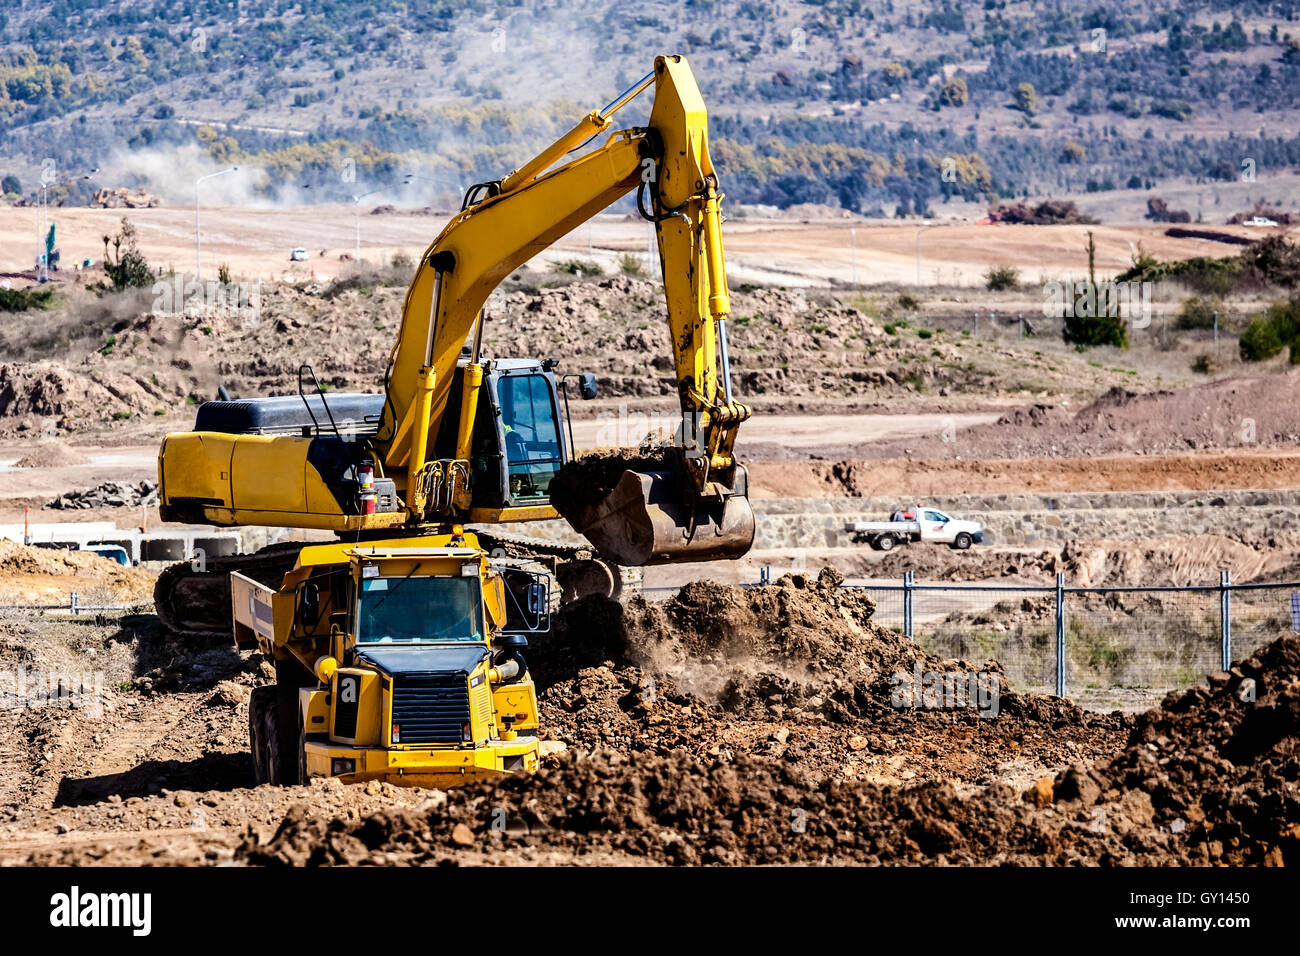 Earth moving machine loading soil into truck on construction site Stock Photo